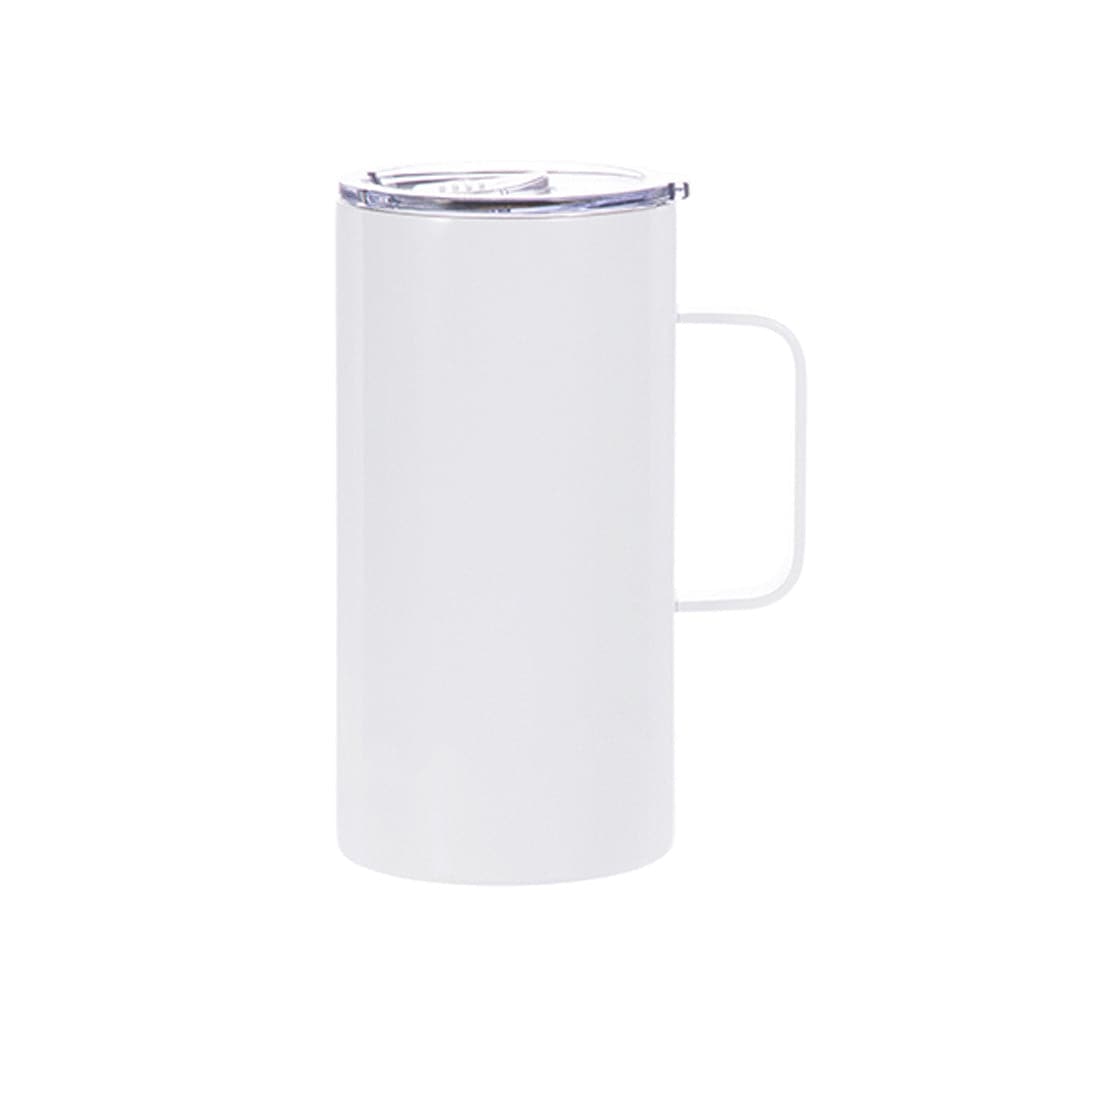 Pearl Coating™ 20oz/600ml Sublimation Stainless Steel Mug - Pack of 5 - Joto Imaging Supplies US